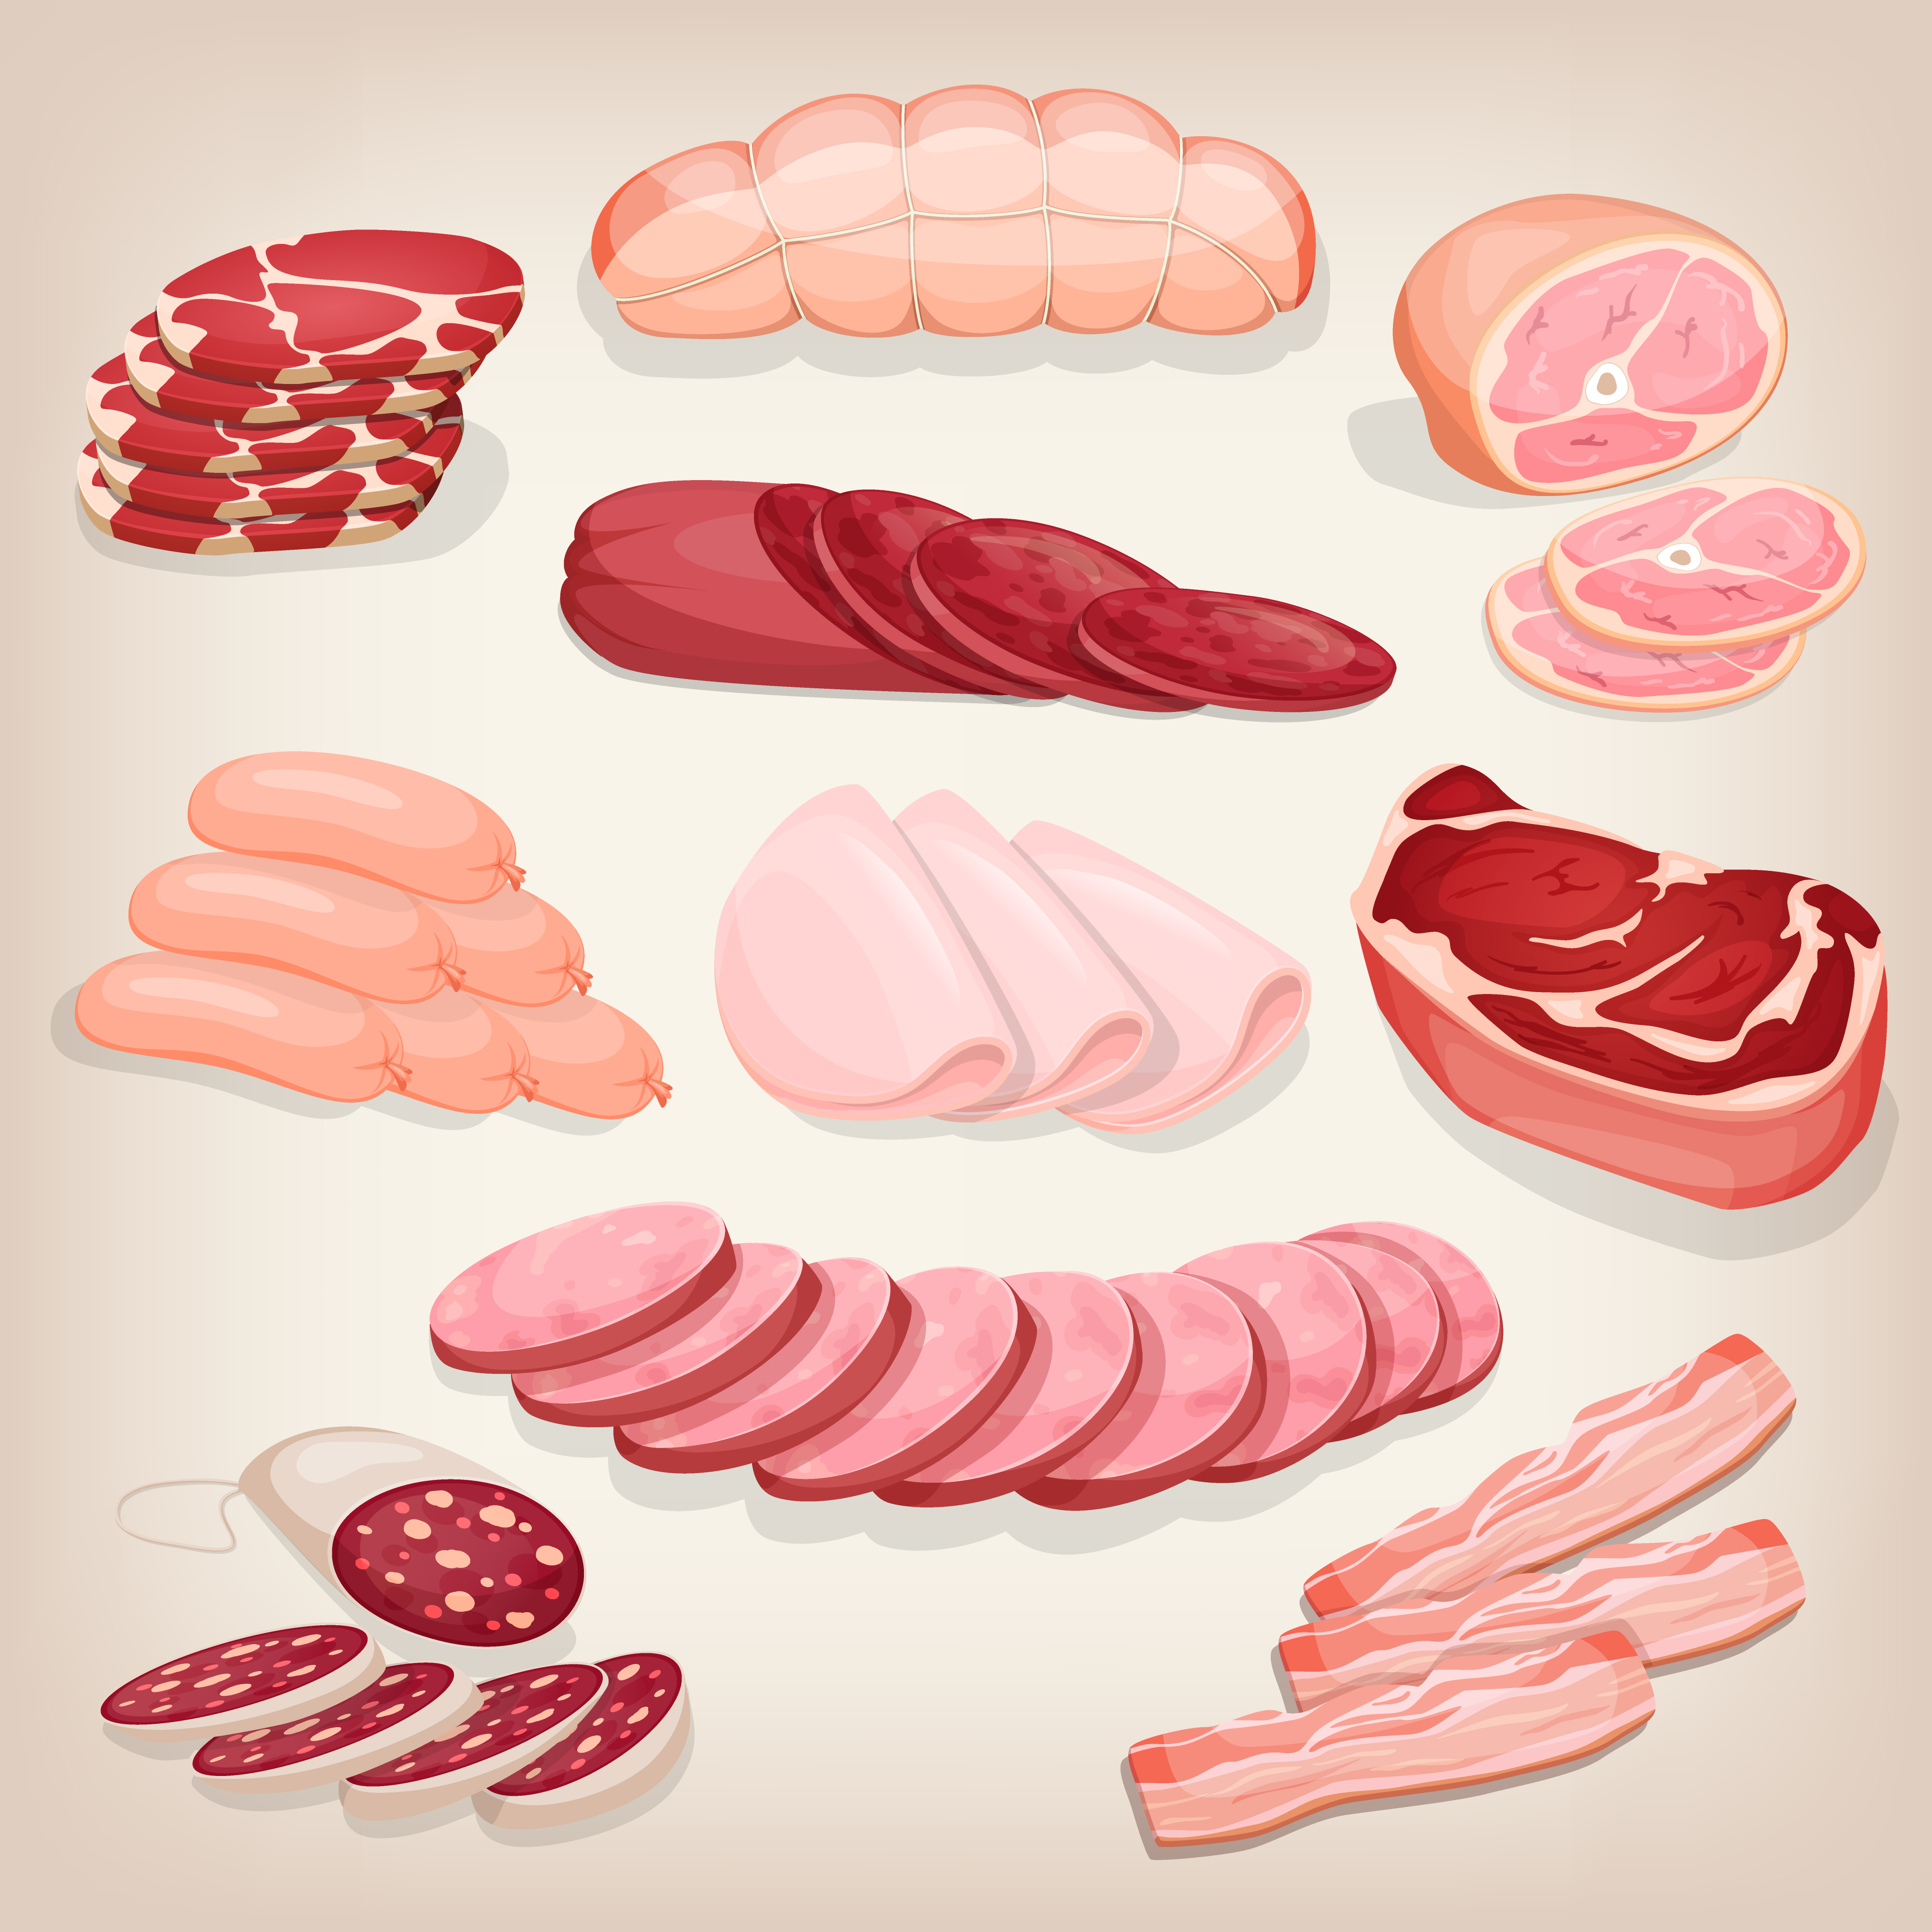 Lunch meat can be a great addition to your diet, but remember to choose those made of high amount of meat and low amount of additives!